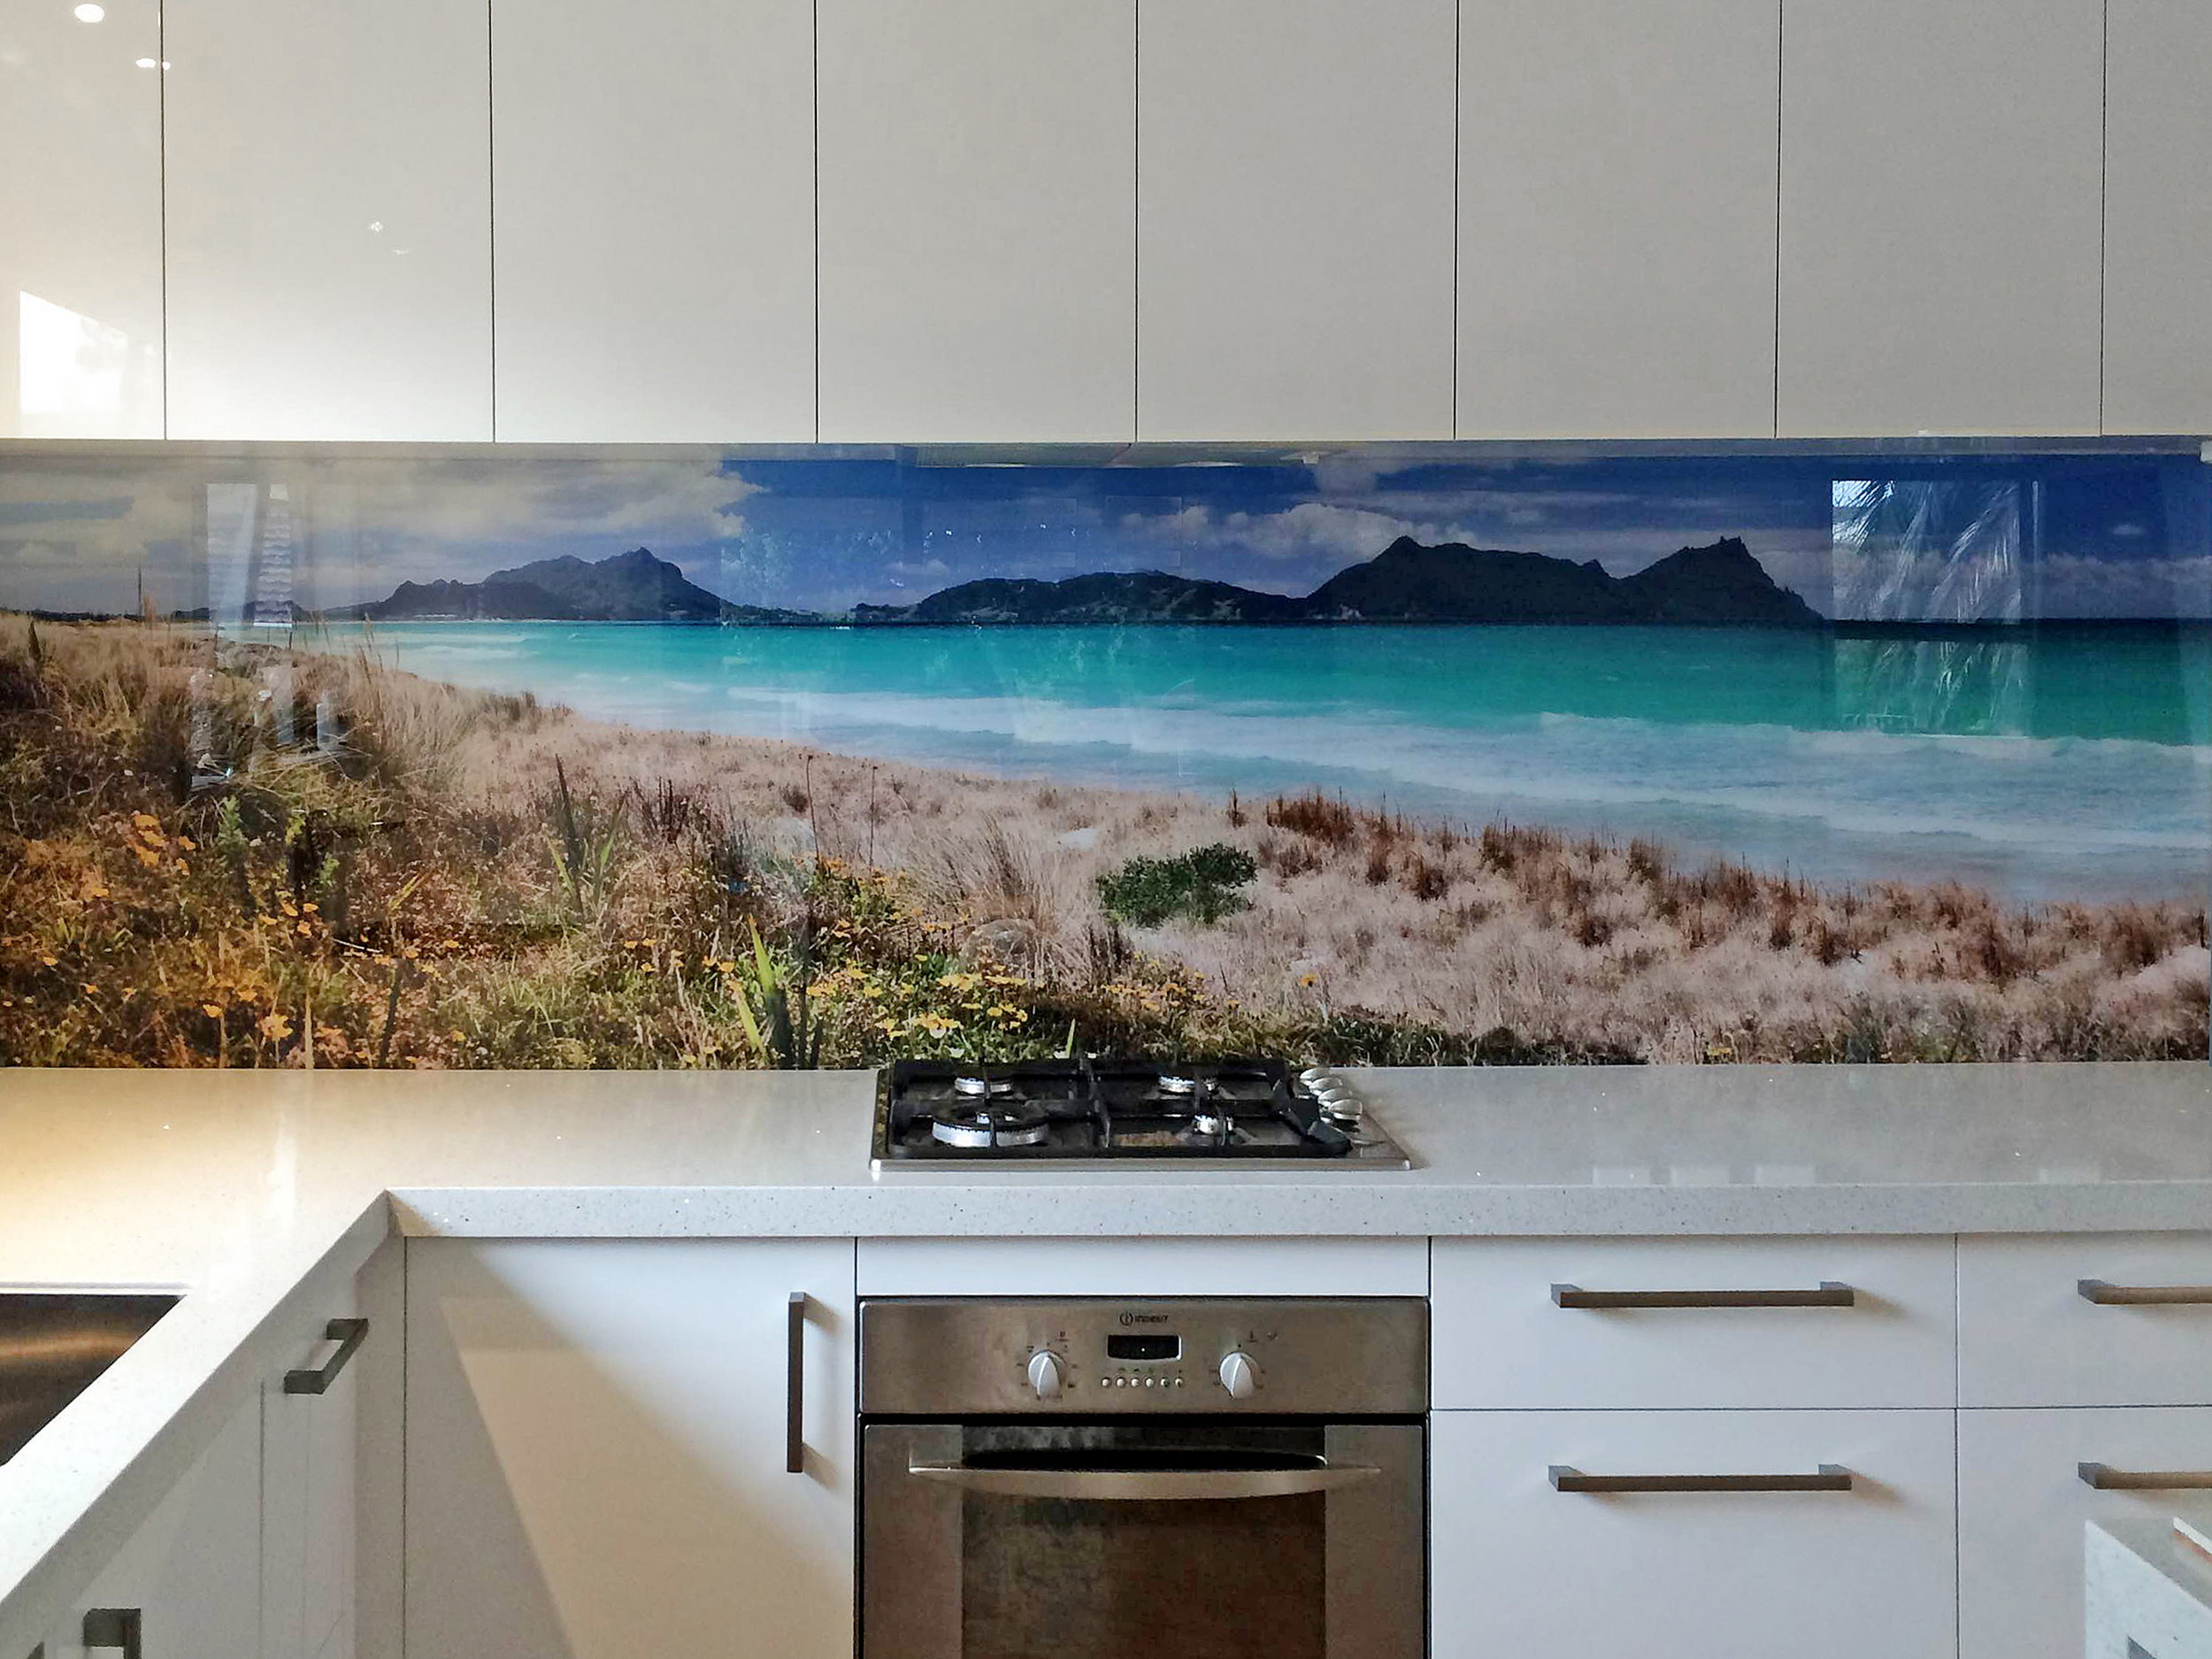 Printed 'images on glass' kitchen splashbacks and glass wall art by Lucy G